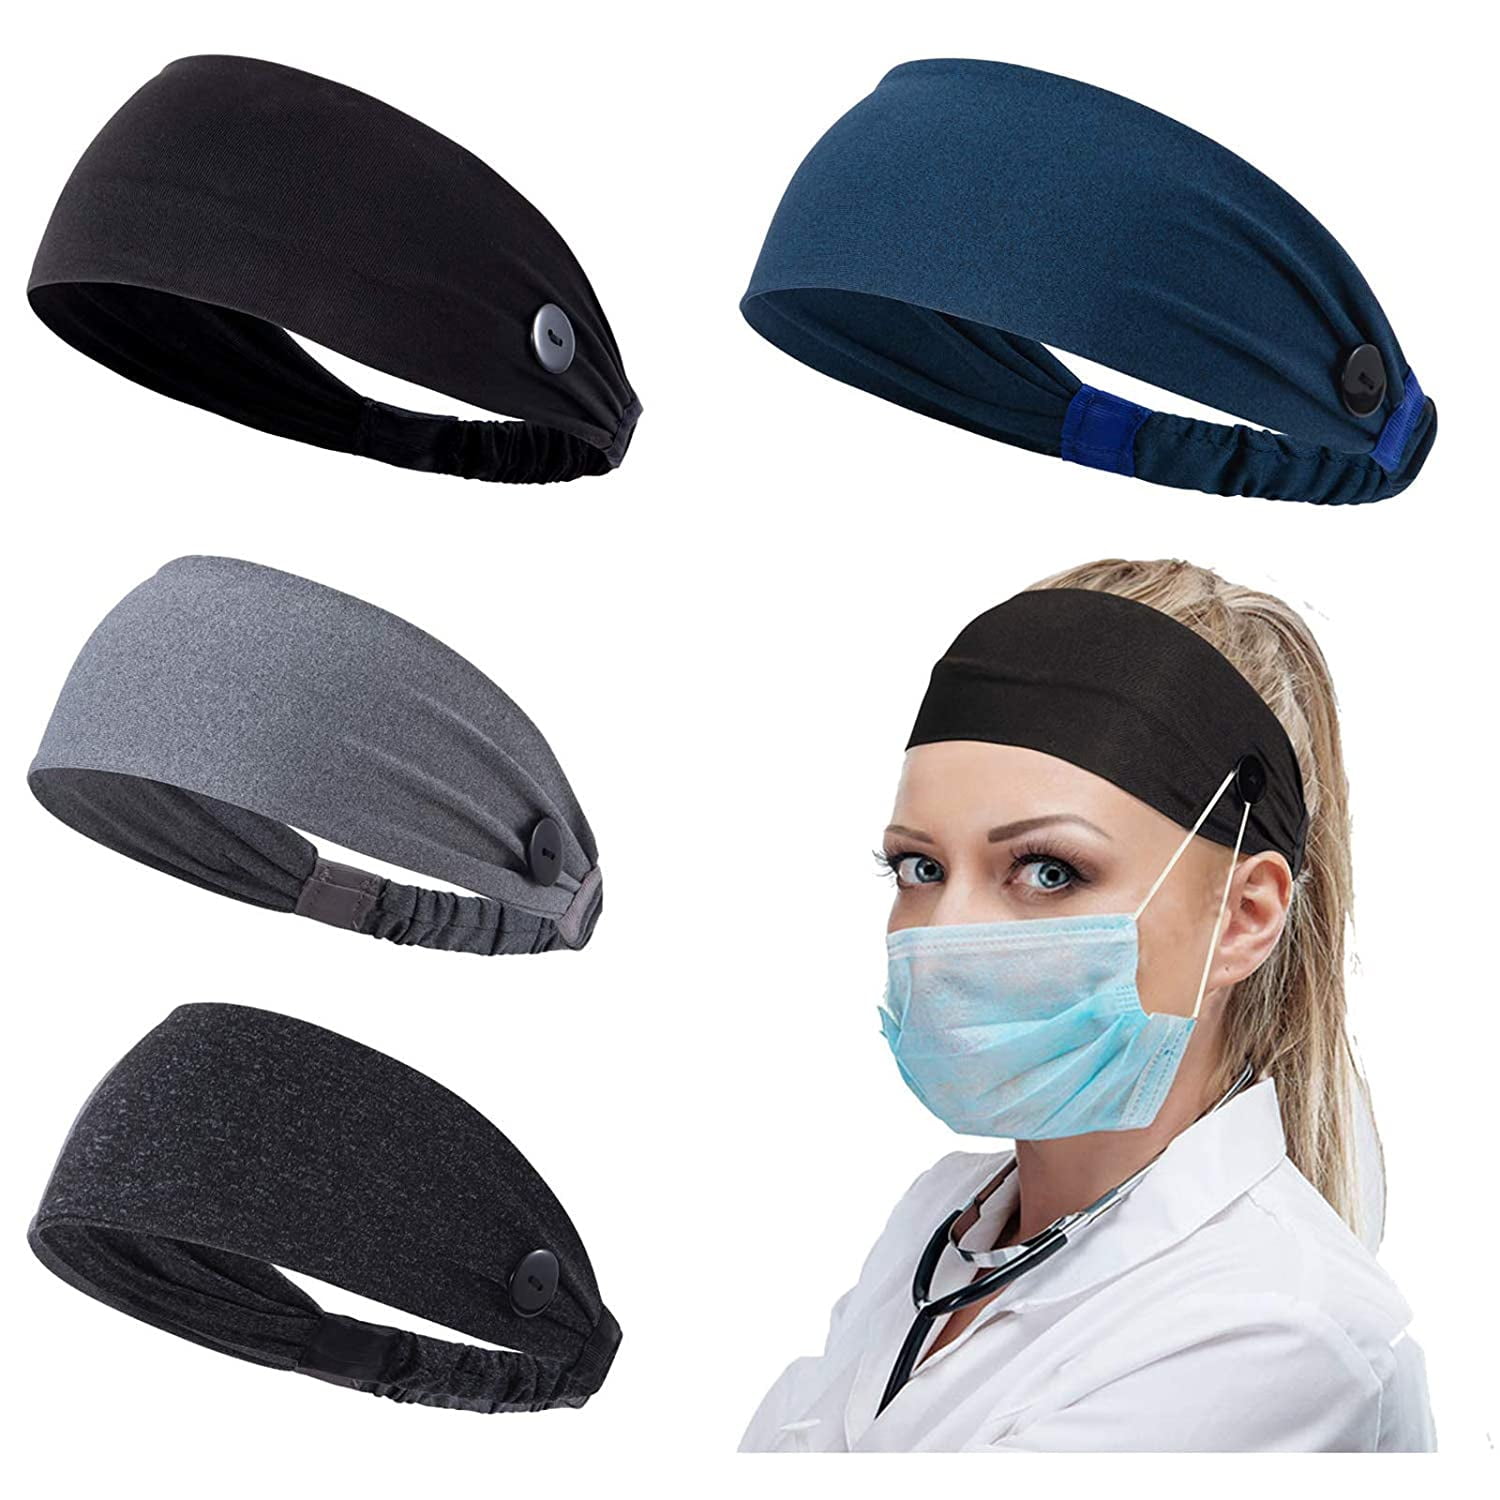 Shan-S Button Headbands Face Guard Shower Sports Workout Sweatband Turban Headwrap Wearing a Yashmak Creative Protect Your Ears with Buttons Headwear Accessories for Men Women 